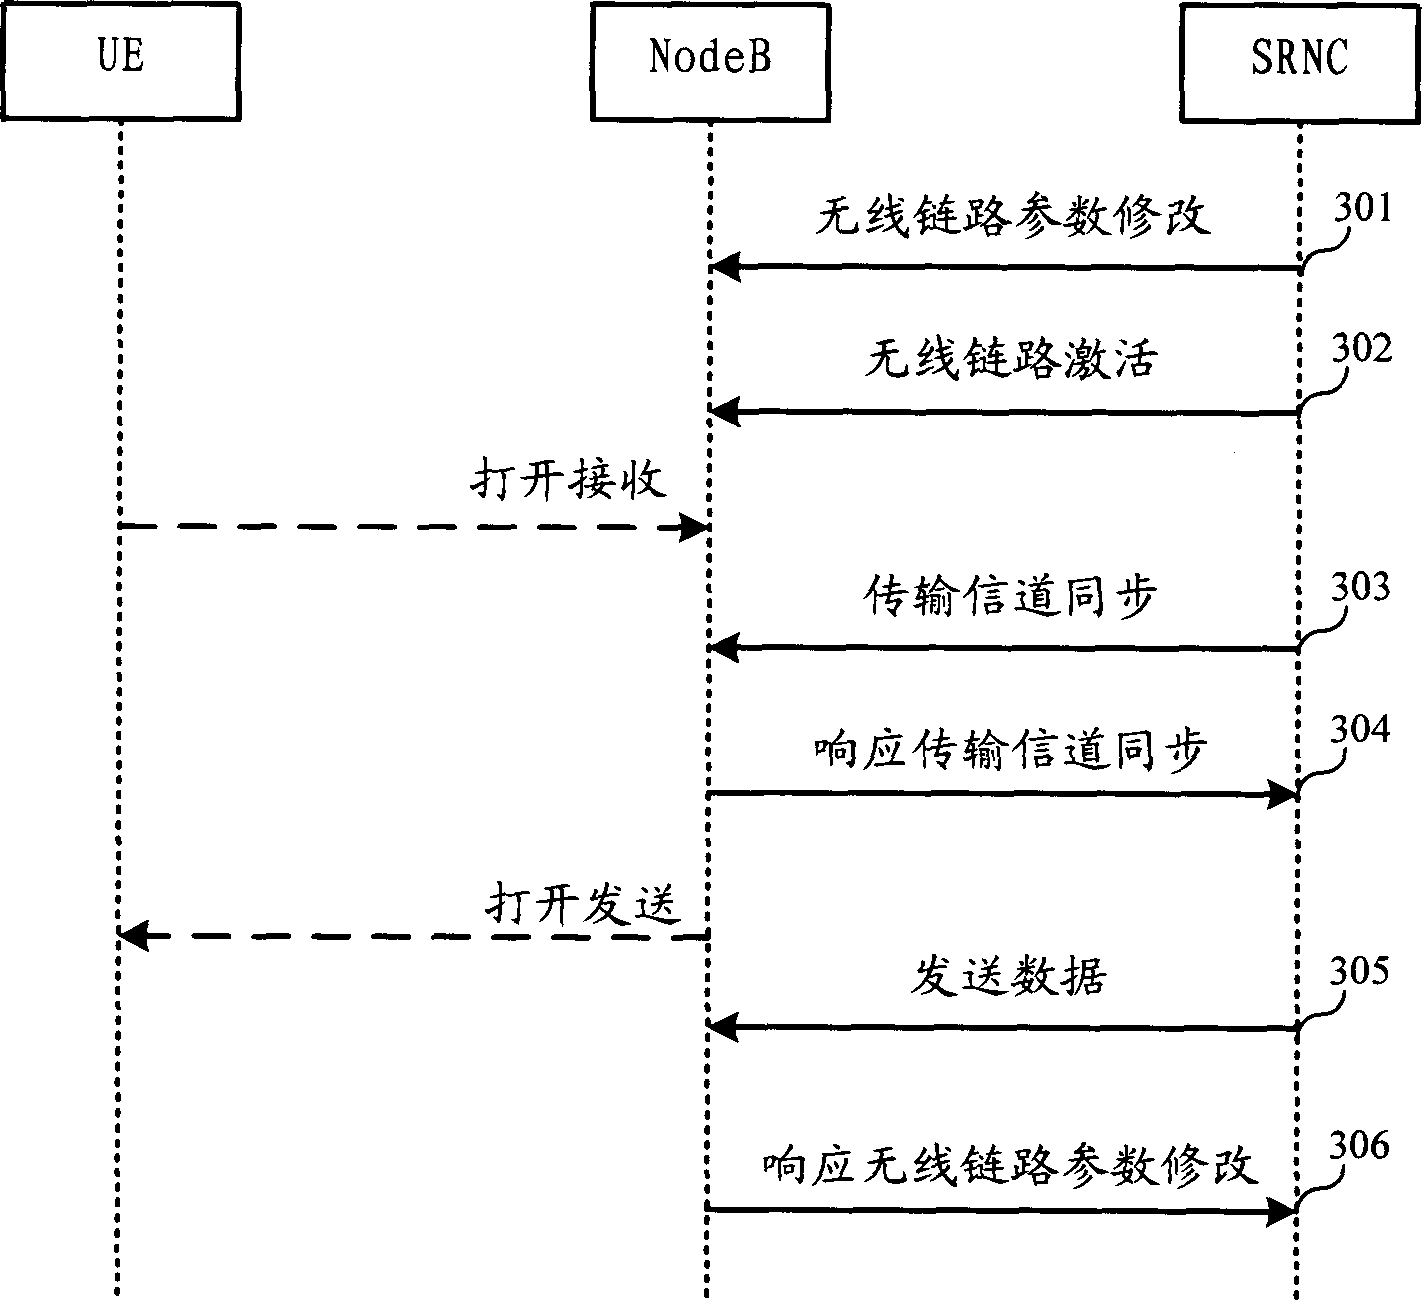 Preset resource active method in mobile communication system